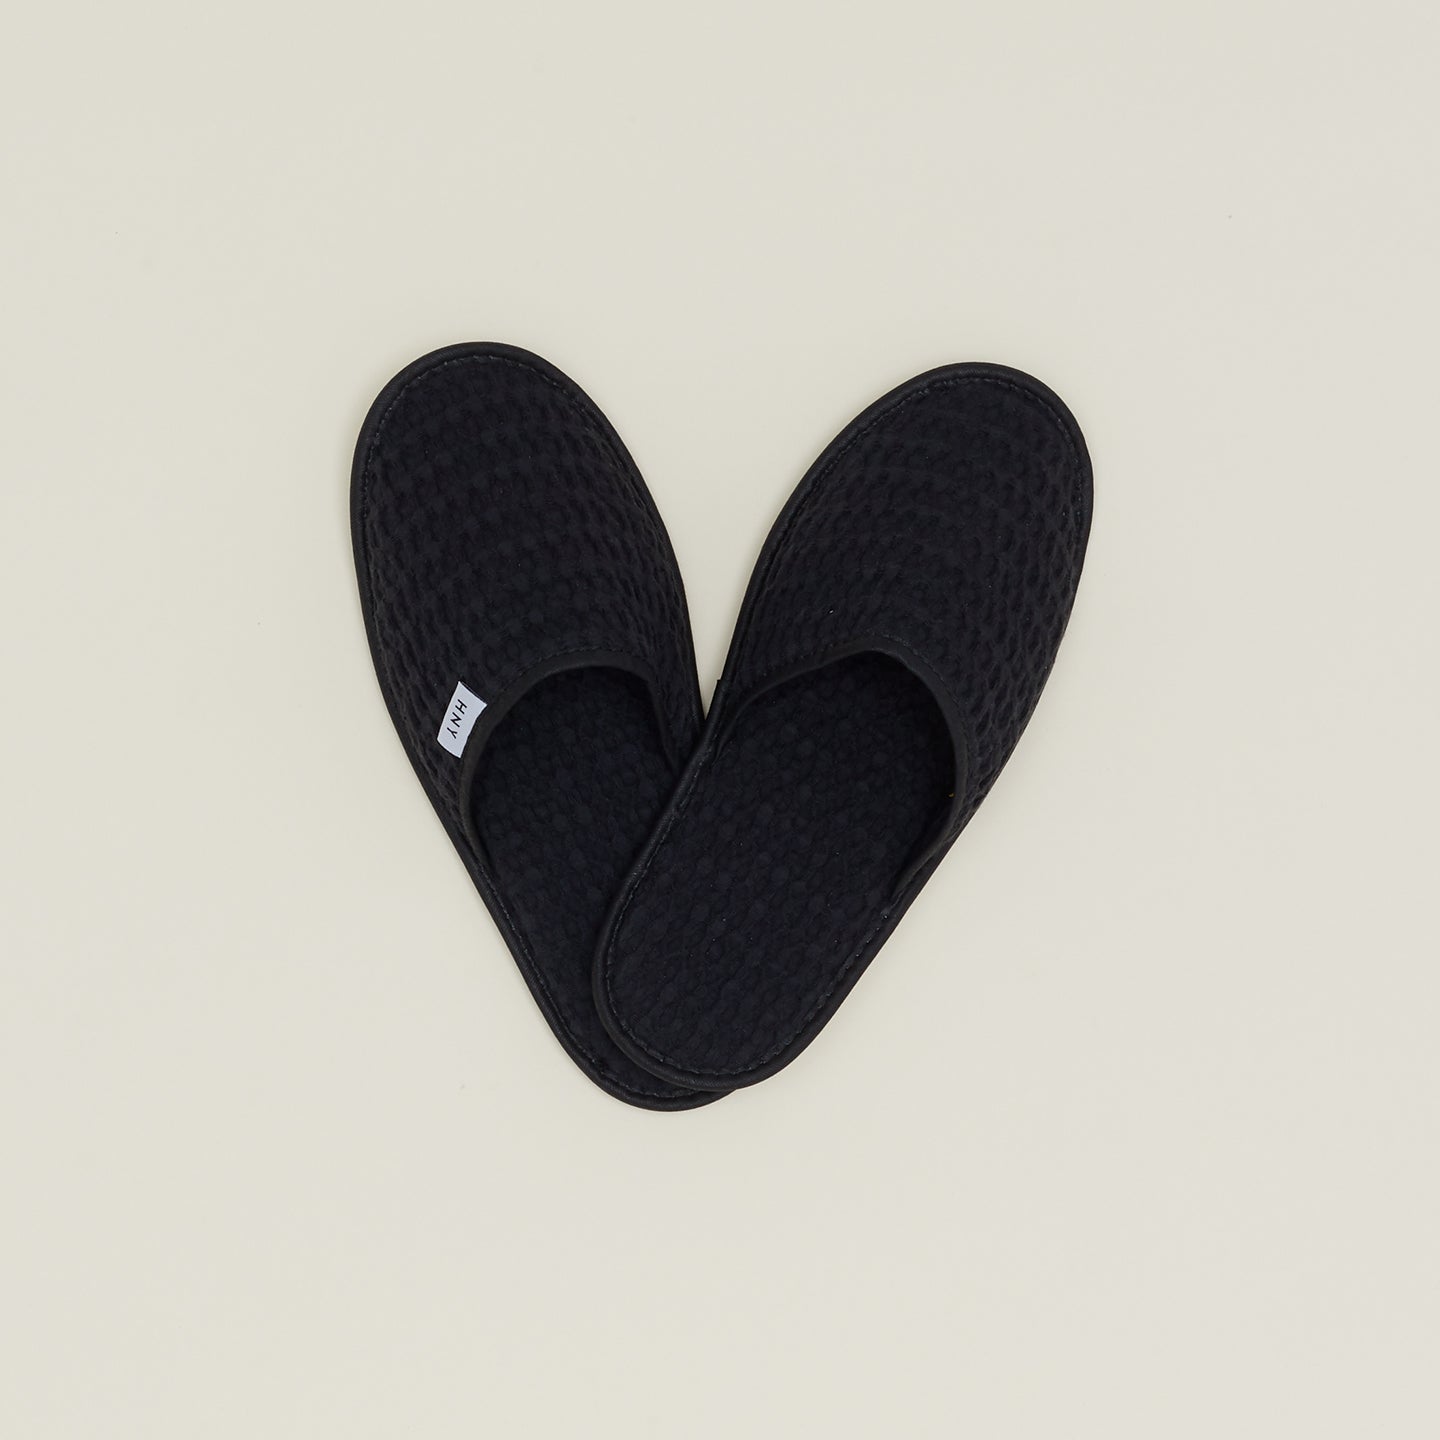 Simple Waffle Slippers - Black